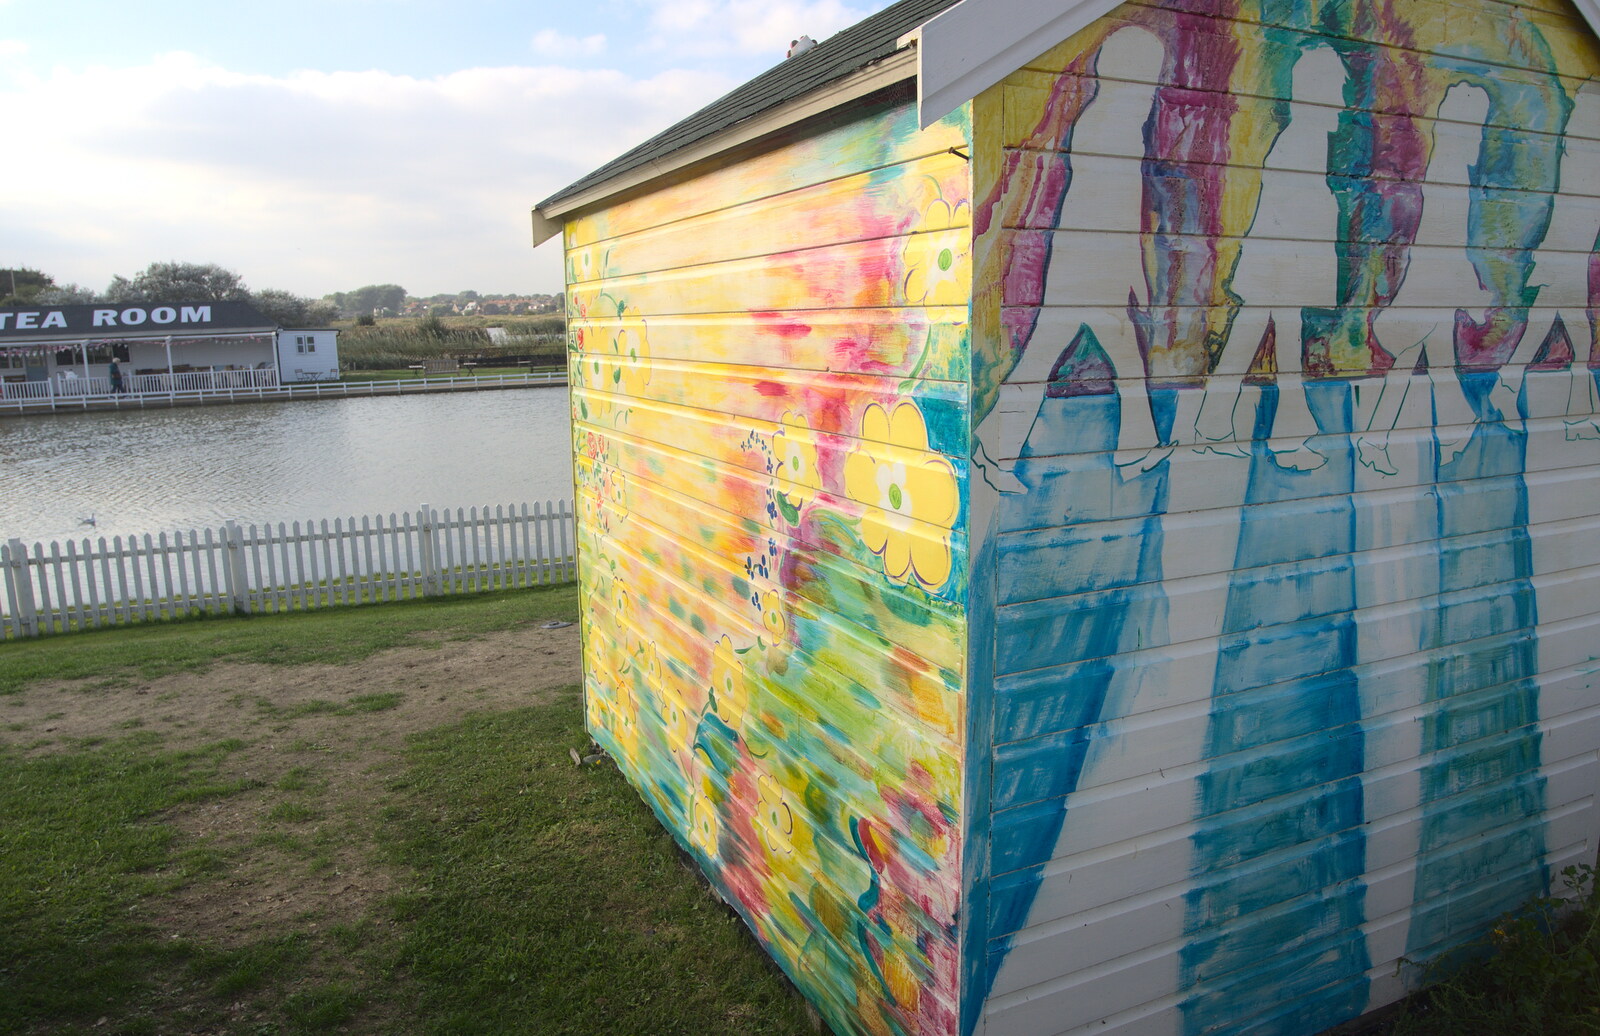 Another painted shed from Southwold By The Sea, Suffolk - 29th September 2013